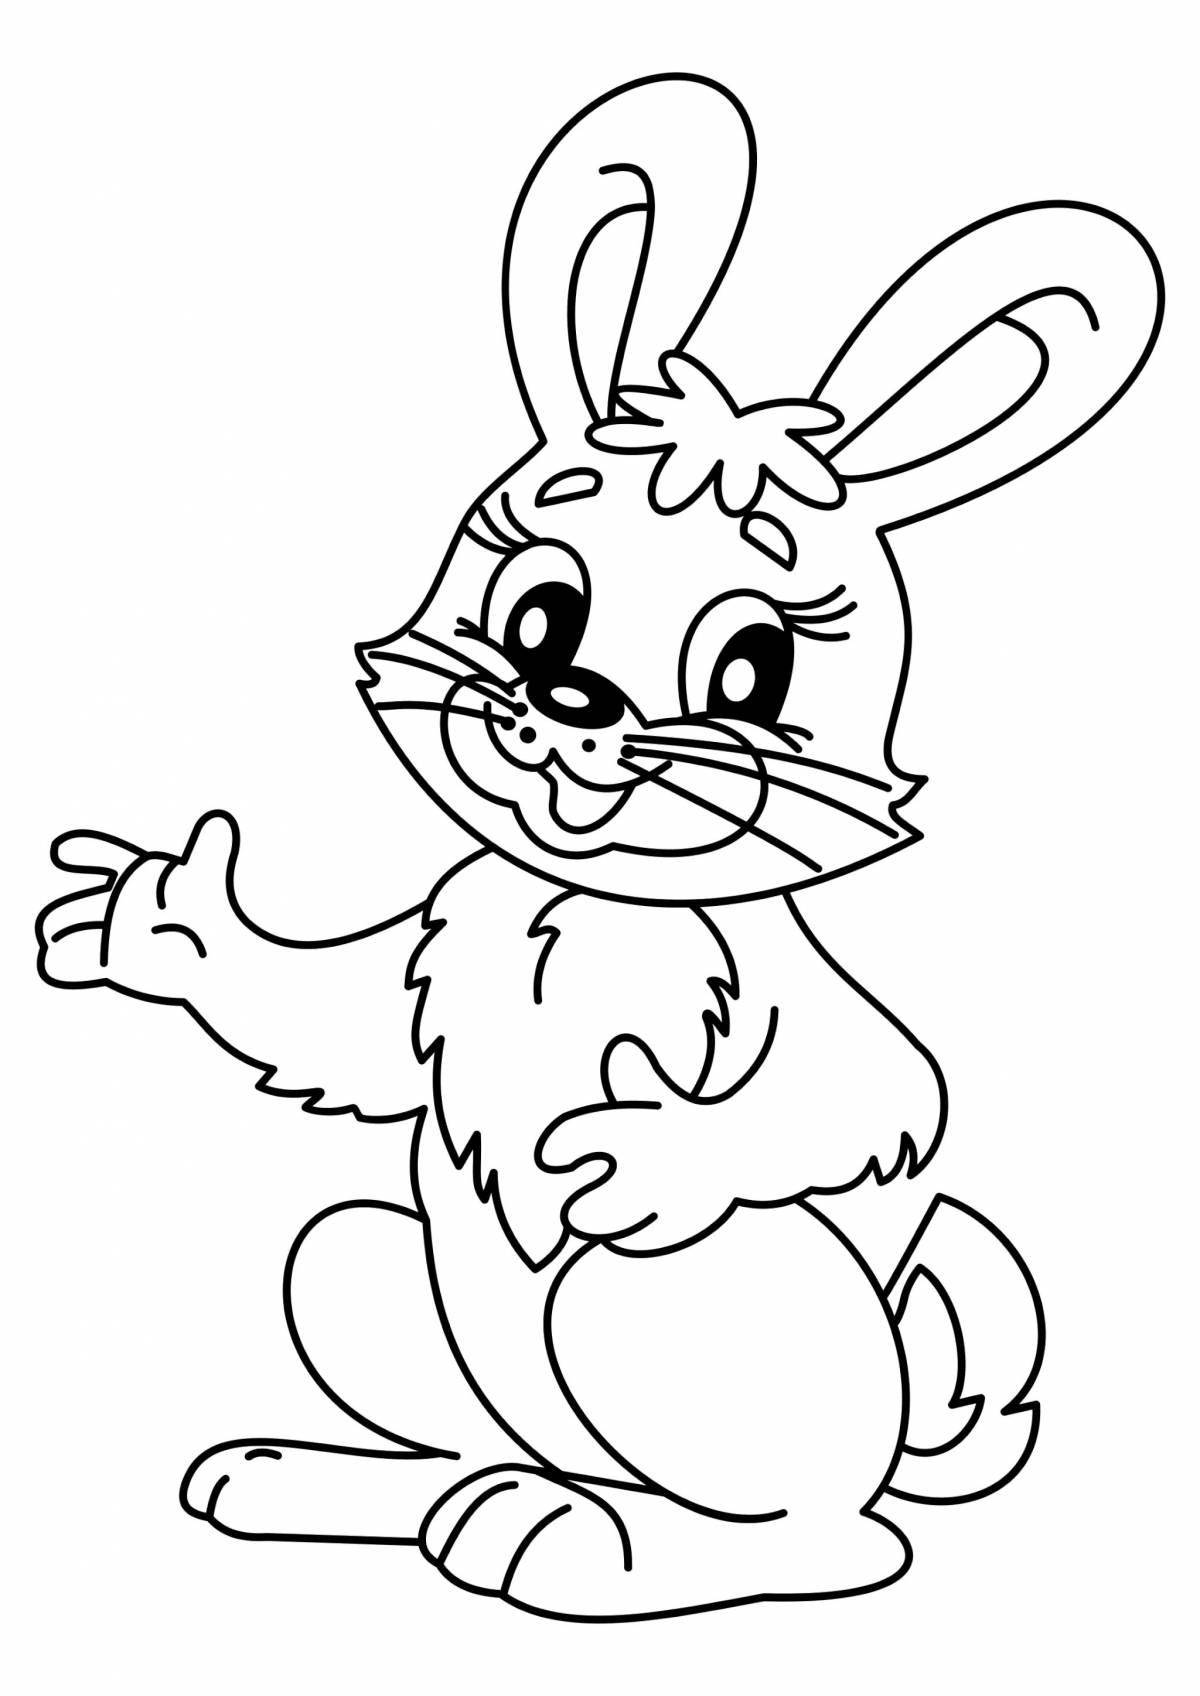 Attractive hare coloring for kids